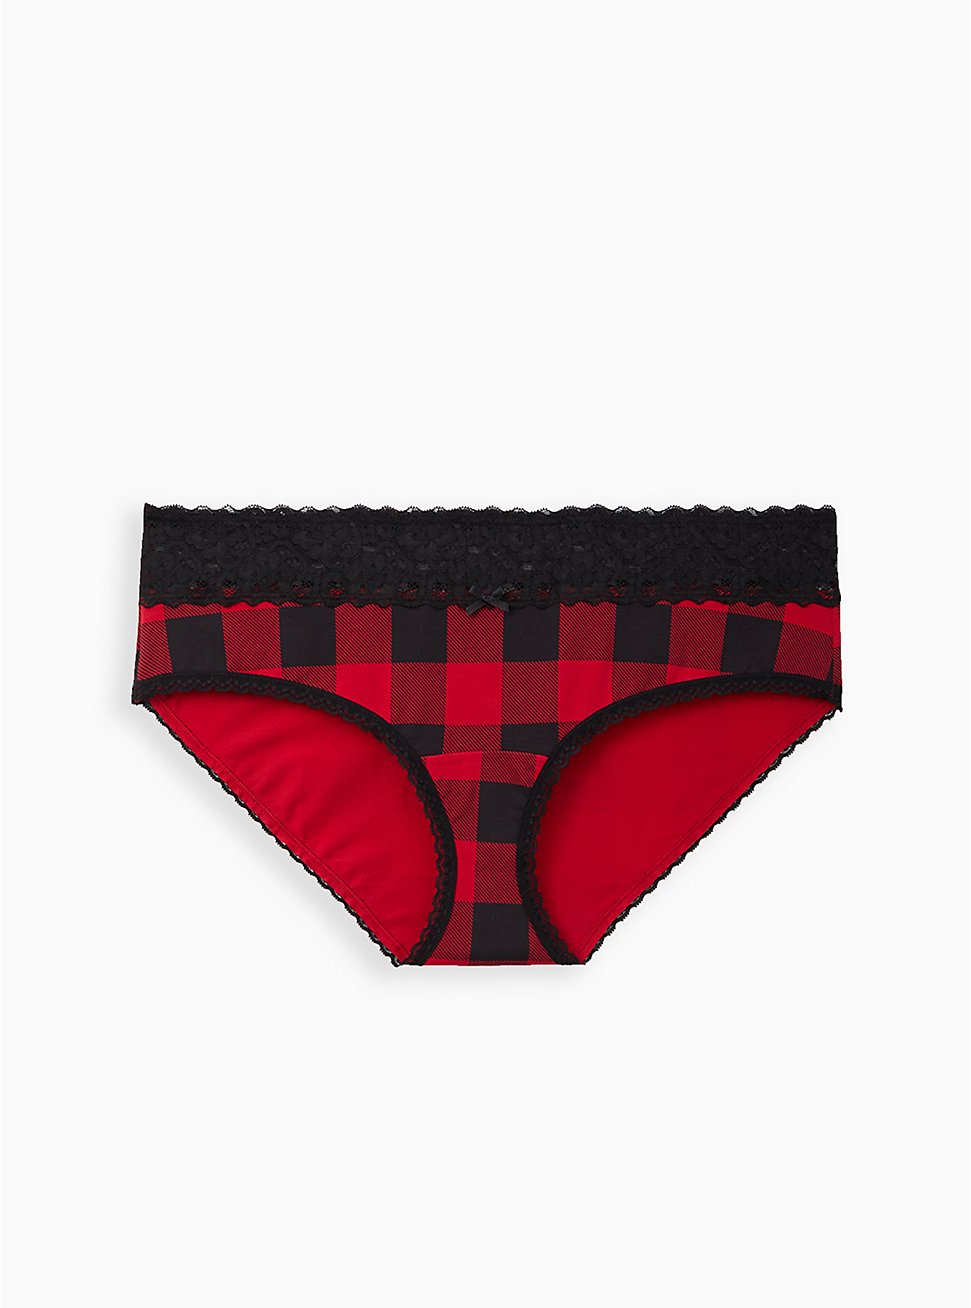 Wide Lace Hipster Panty - Cotton Buffalo Plaid Black & Red, BUFFALO CHECK, hi-res